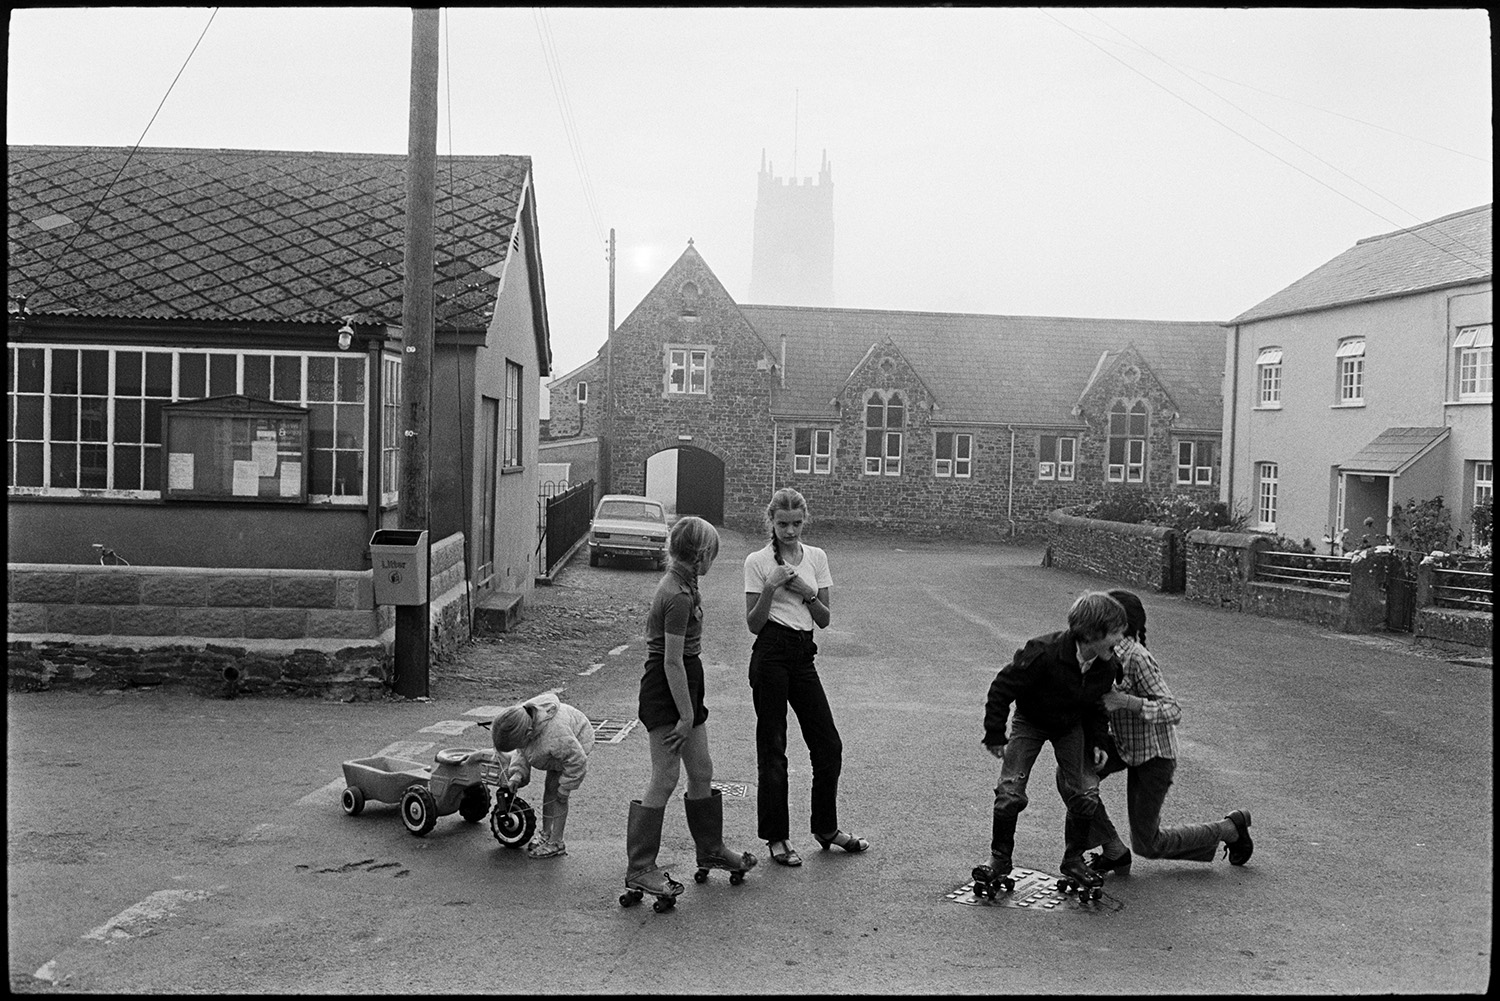 Children playing in village street with church tower and Post Office. Misty day, fog.
[Street scene with five children playing in a road at High Bickington. Two children are wearing wellington boots with roller skates and a young child has a ride on toy tractor and trailer. A building with a notice board is on the street corner and the church tower can be seen in the mist and fog in the background.]